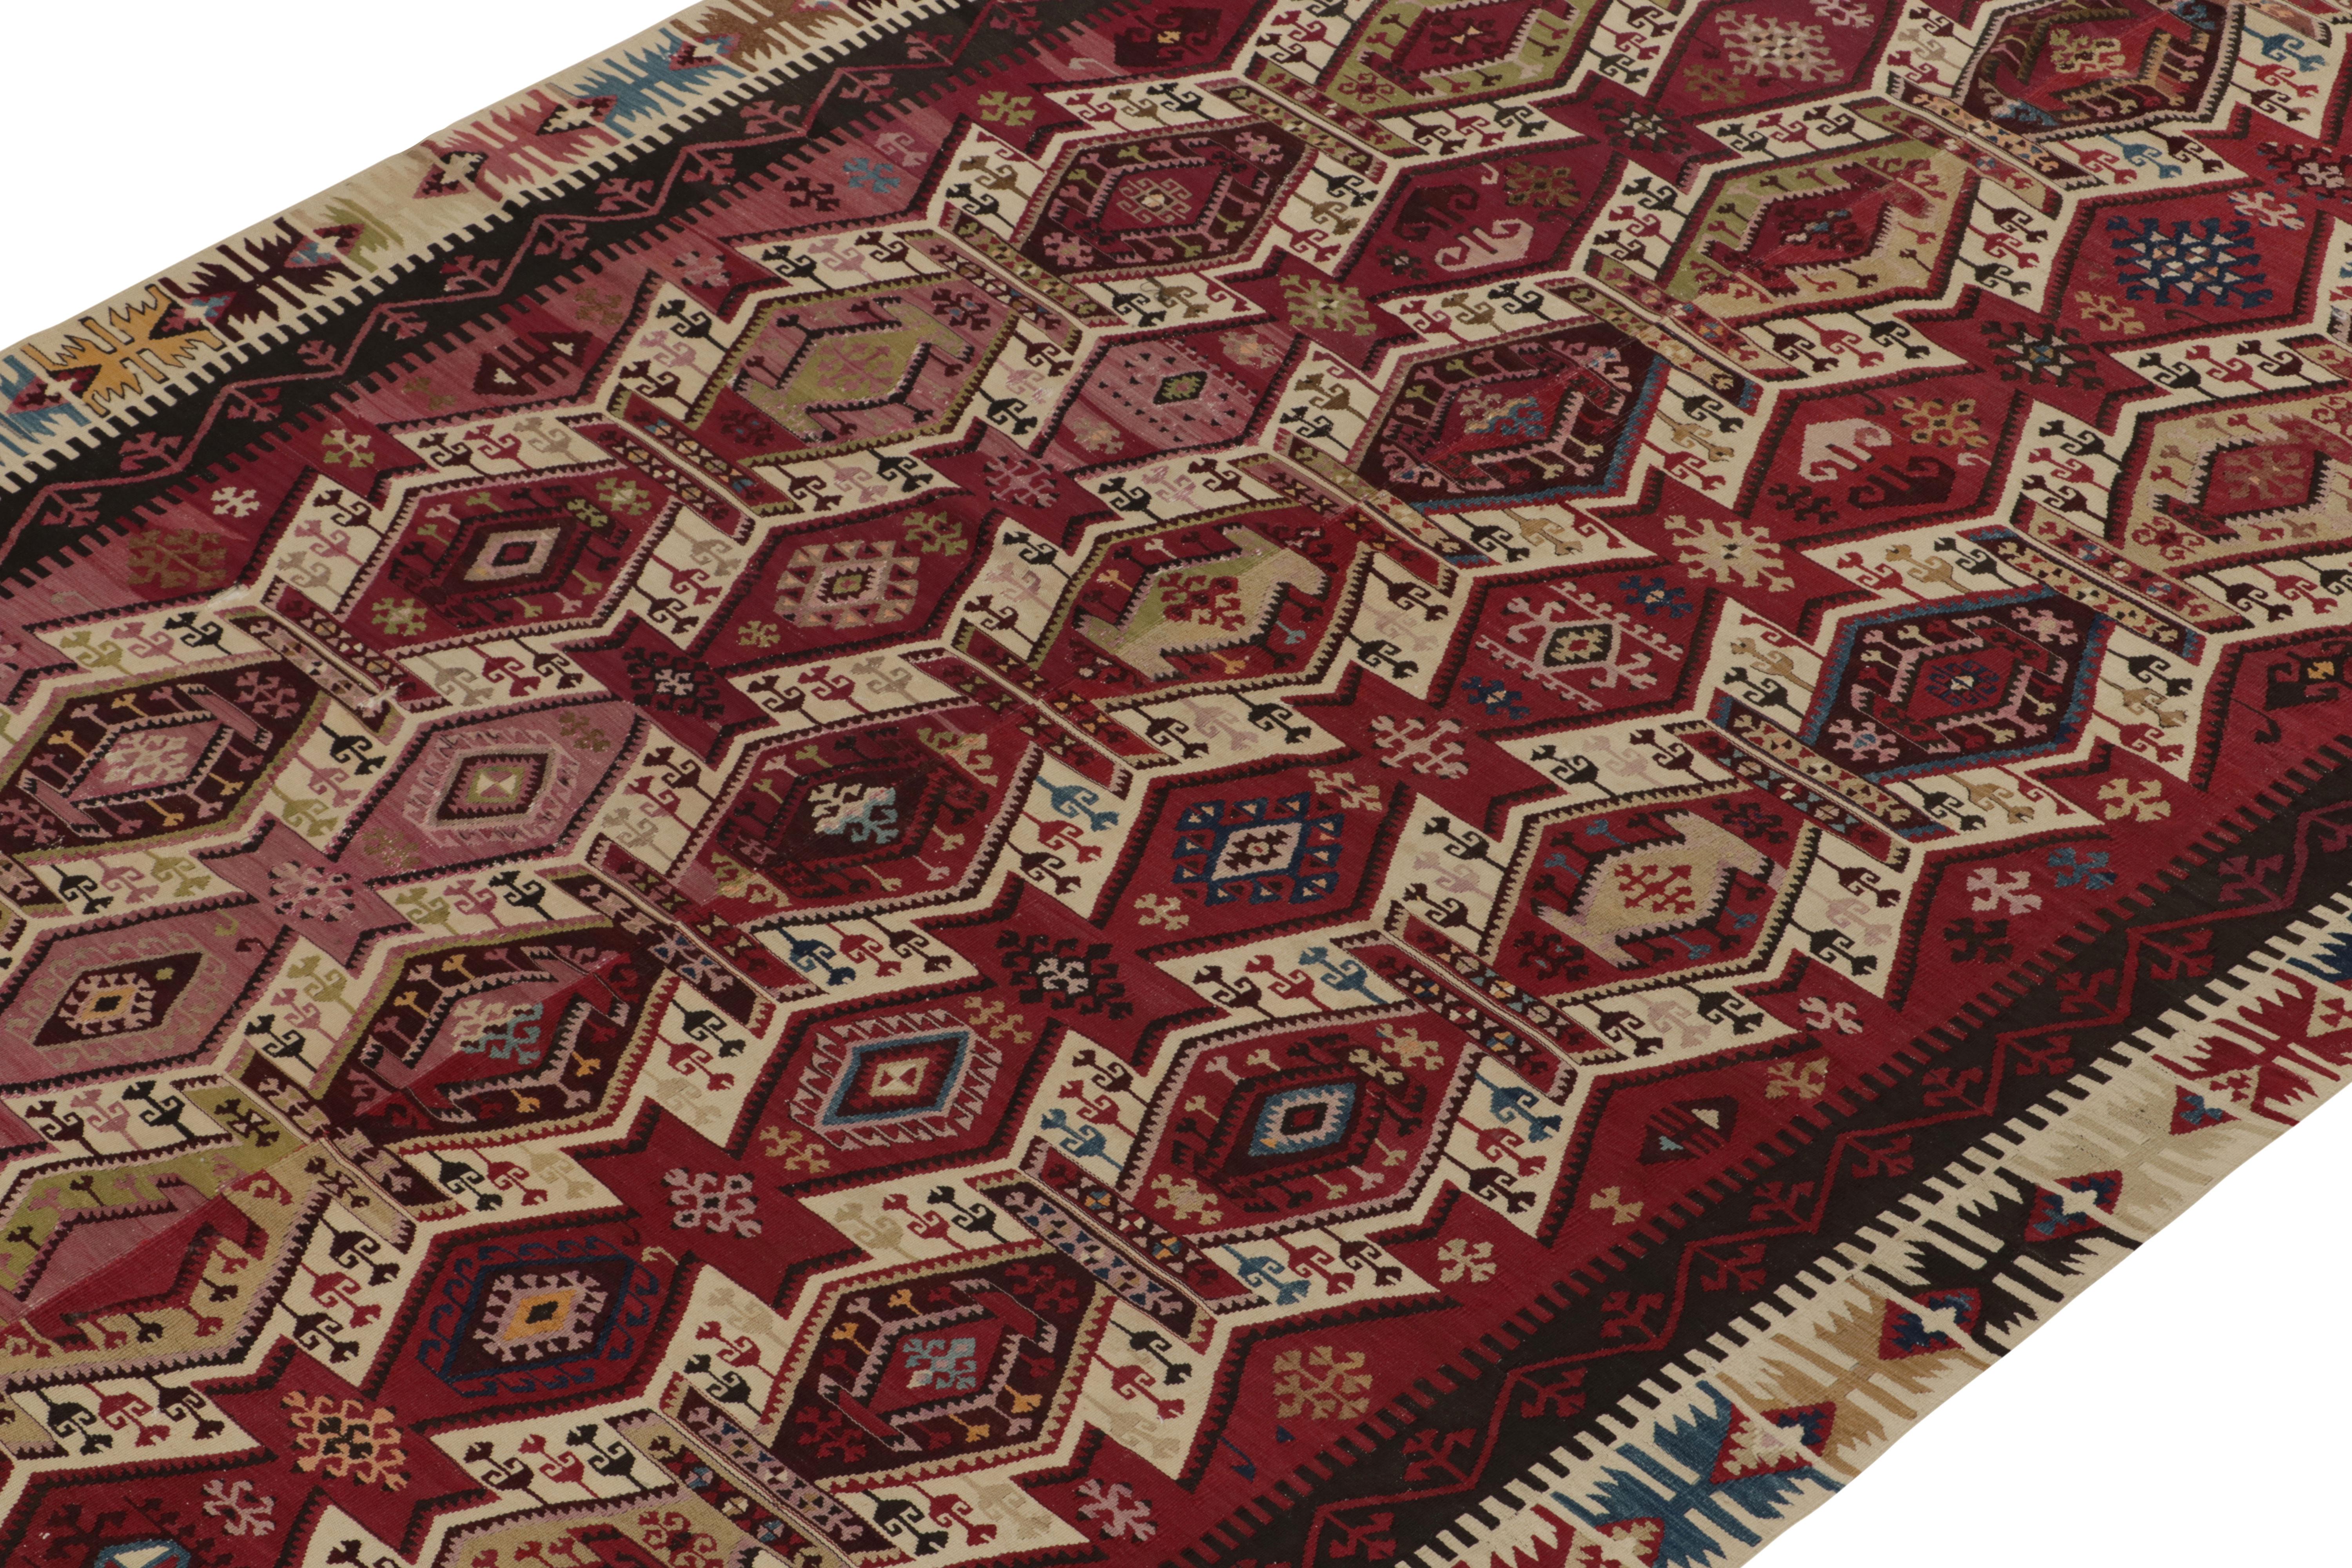 Hand-Knotted Antique Kilim Rug in Red, Brown, Beige Tribal Geometric Pattern by Rug & Kilim For Sale